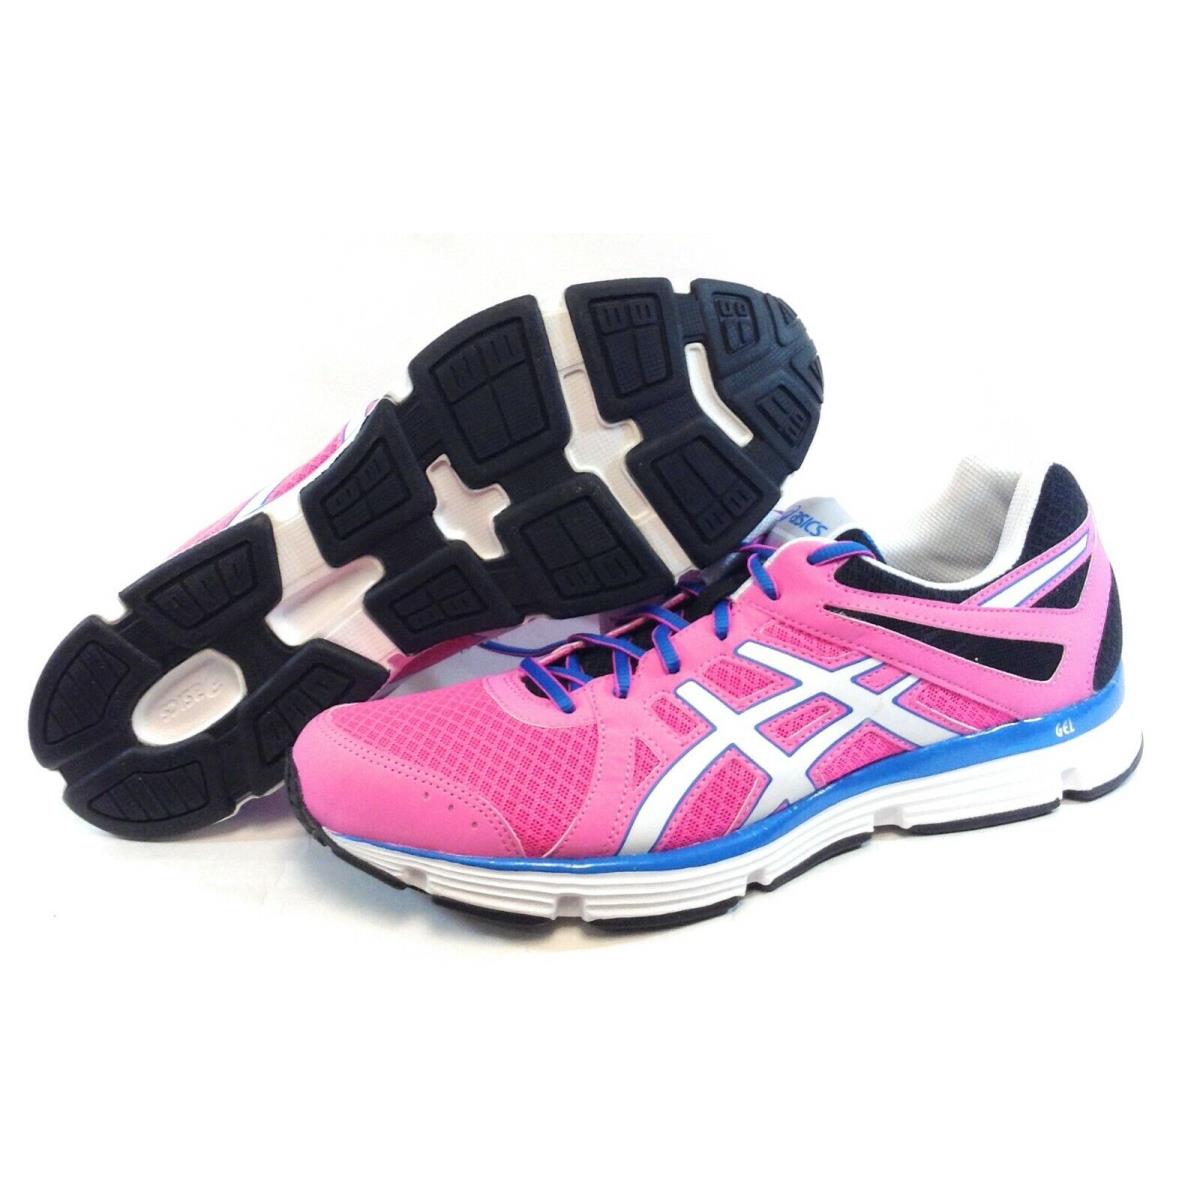 Womens Asics Gel Invasion T3A5Q 3501 Pink White Black Blue Sneakers Shoes